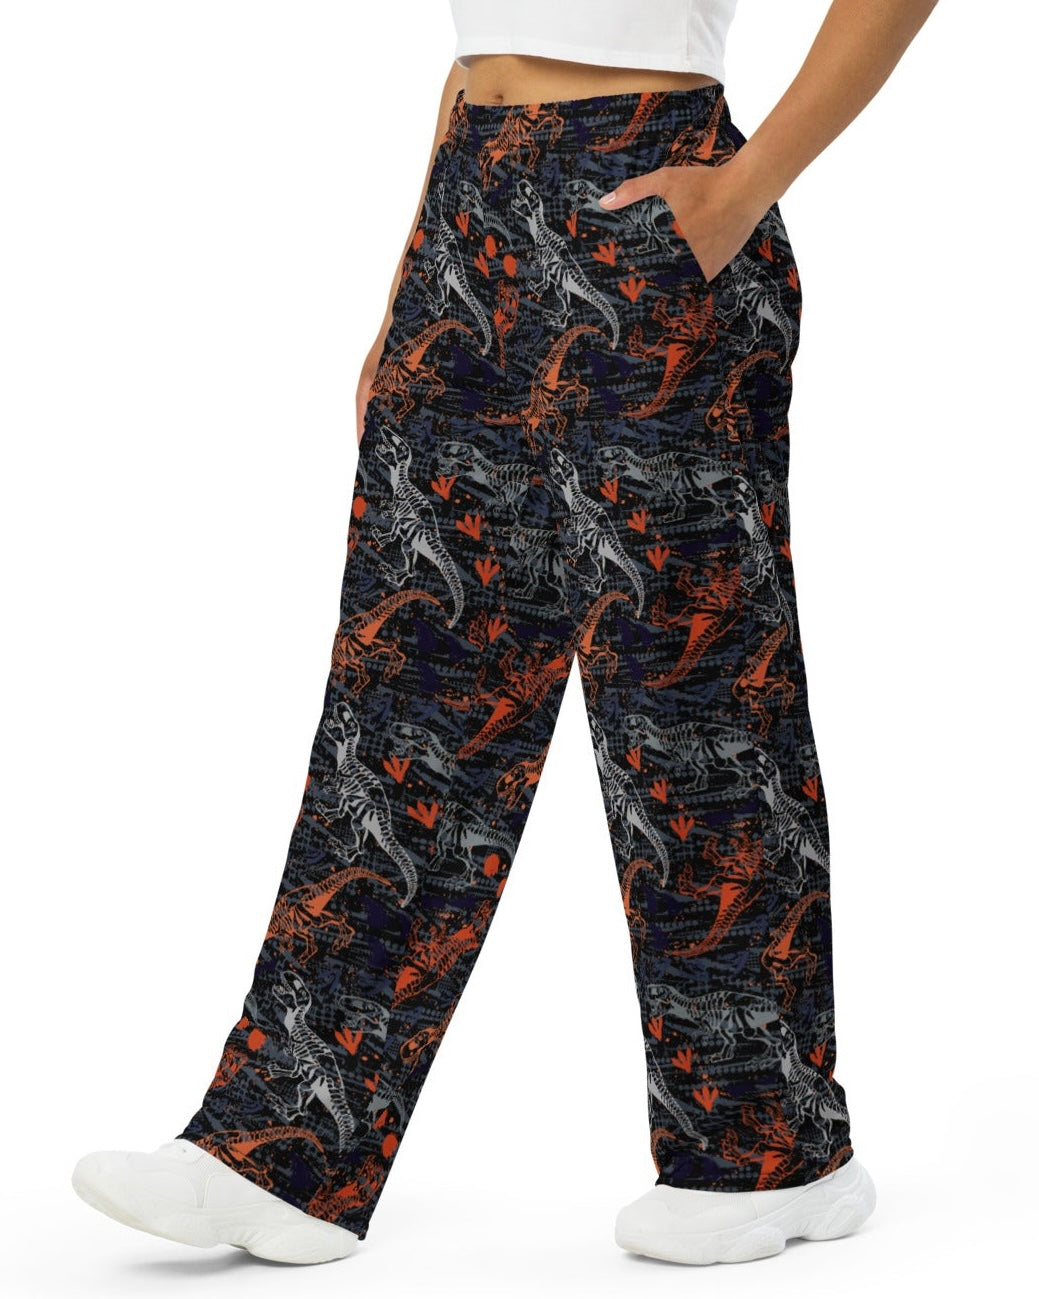 Side view of model rocking One Stop Rave's T-Wrecked Wide Leg Pants with a distinct dinosaur print.